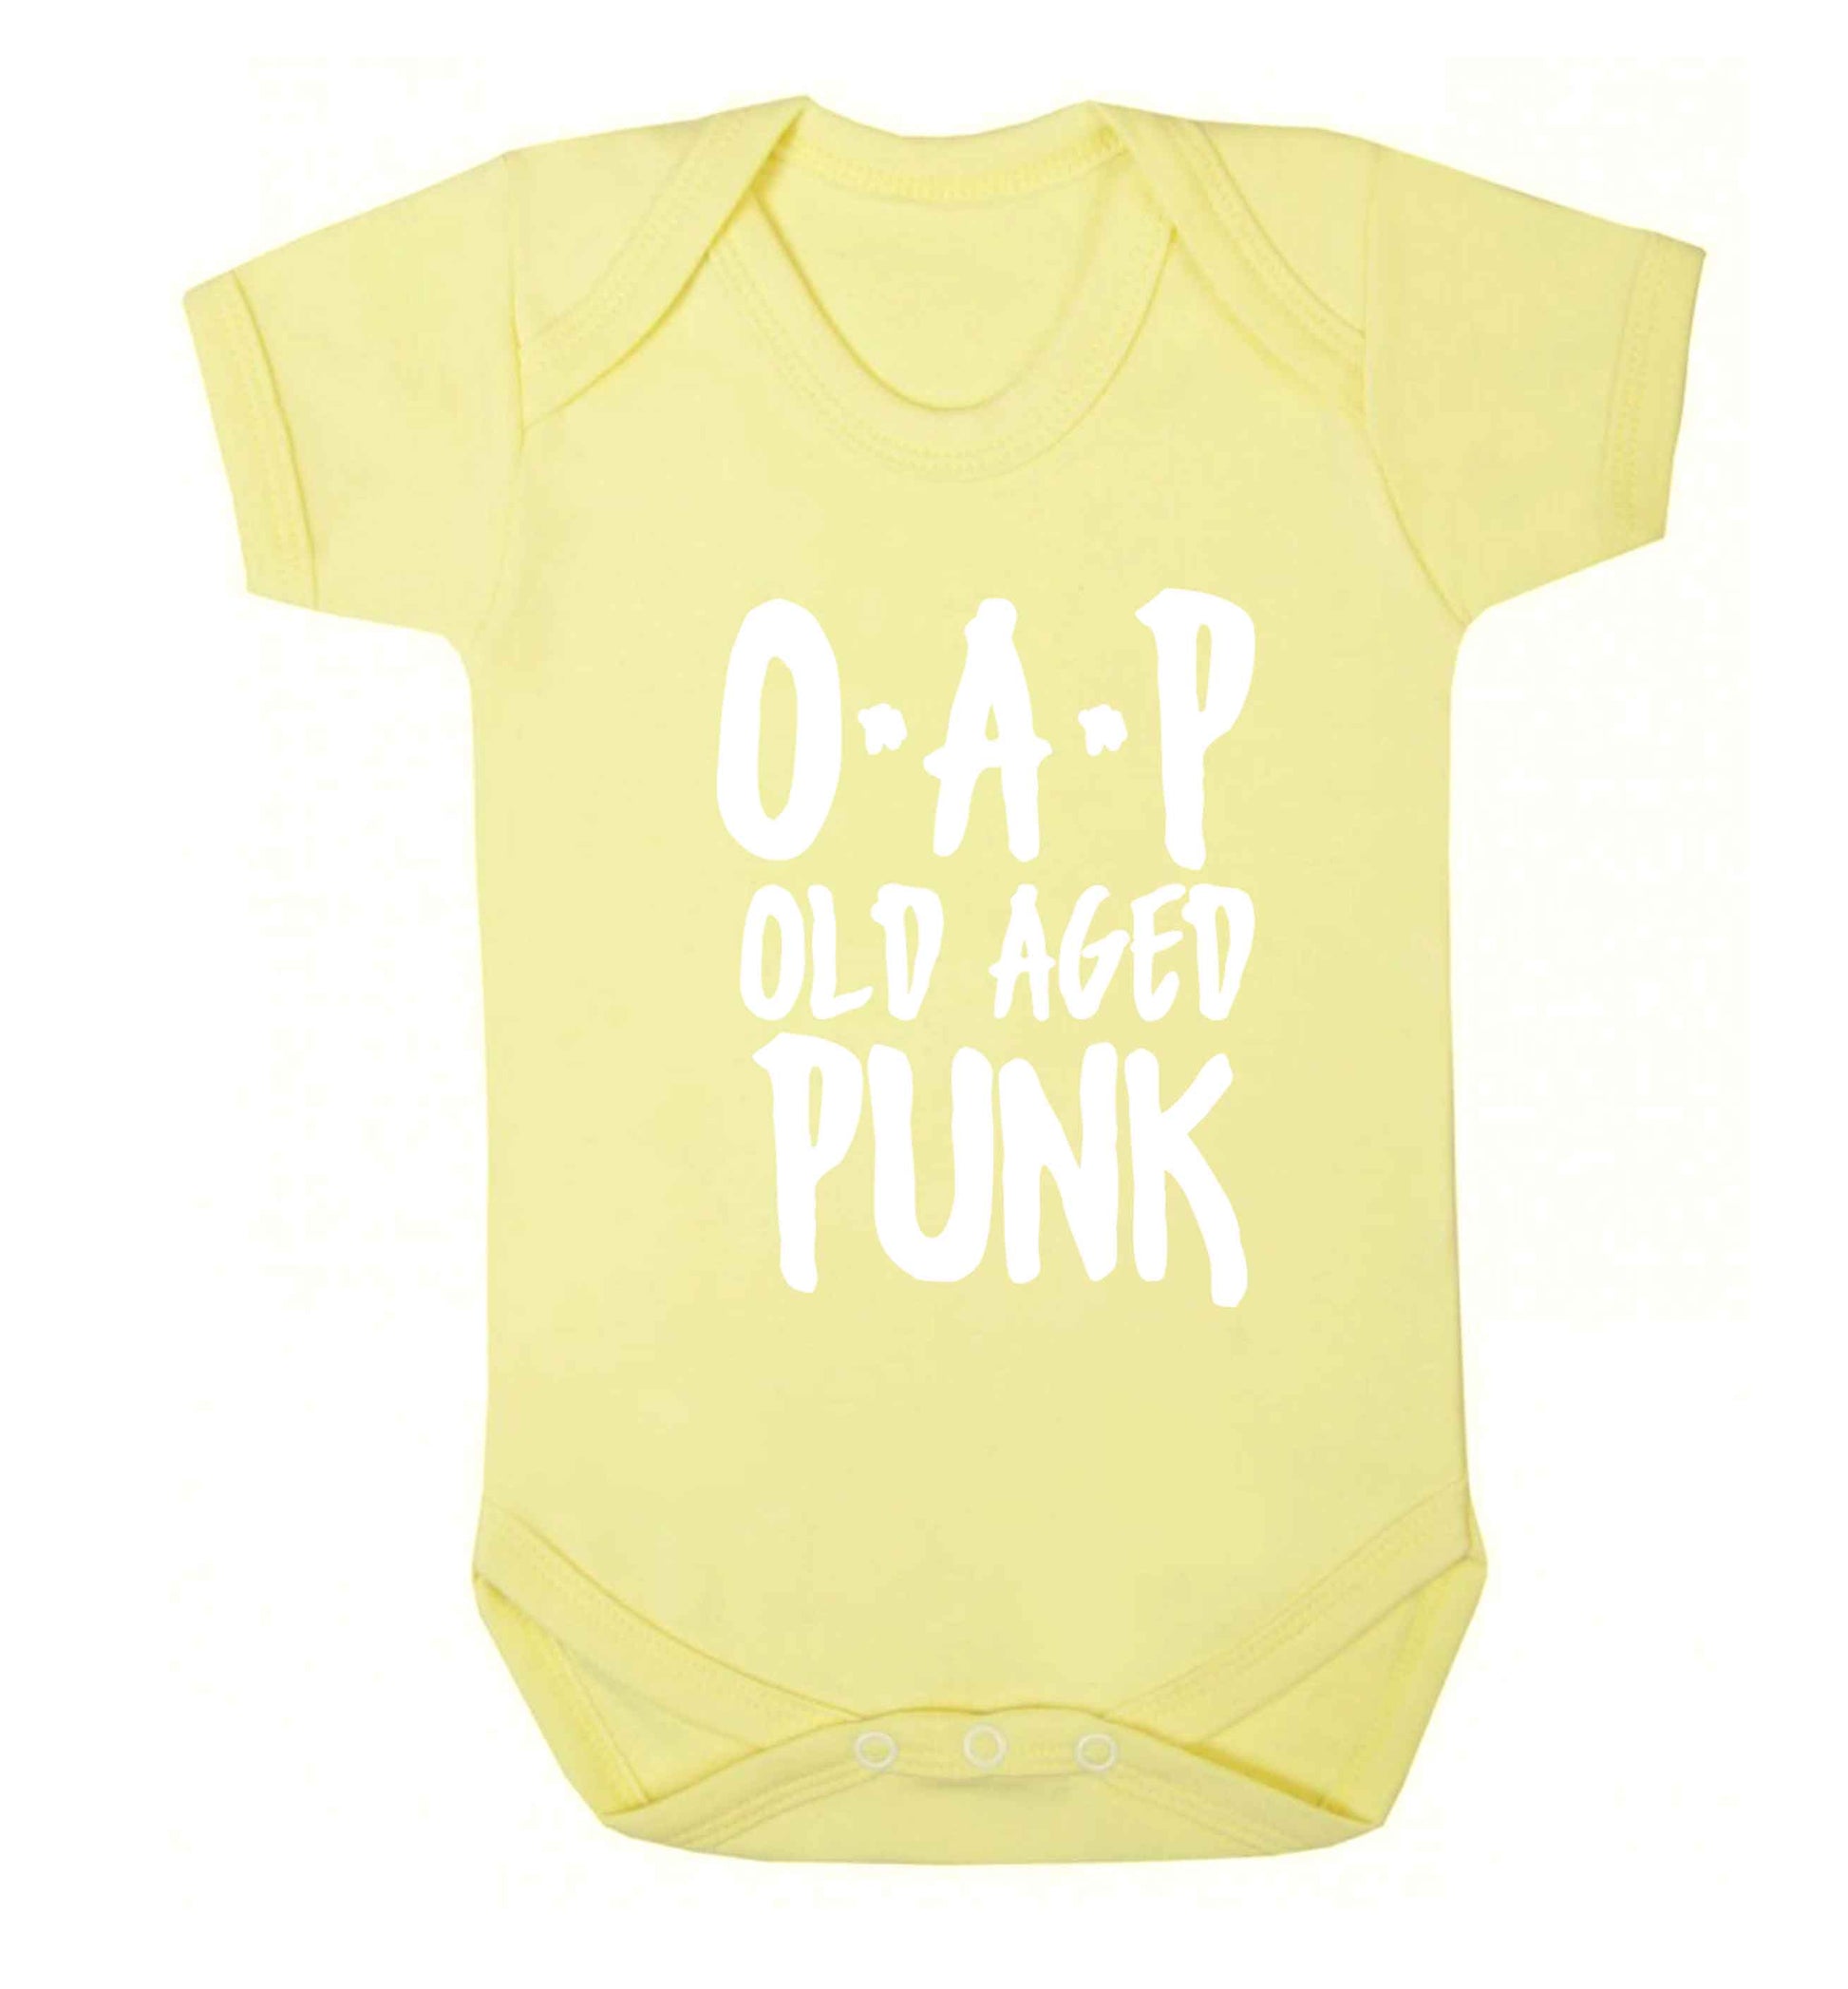 O.A.P Old Age Punk Baby Vest pale yellow 18-24 months